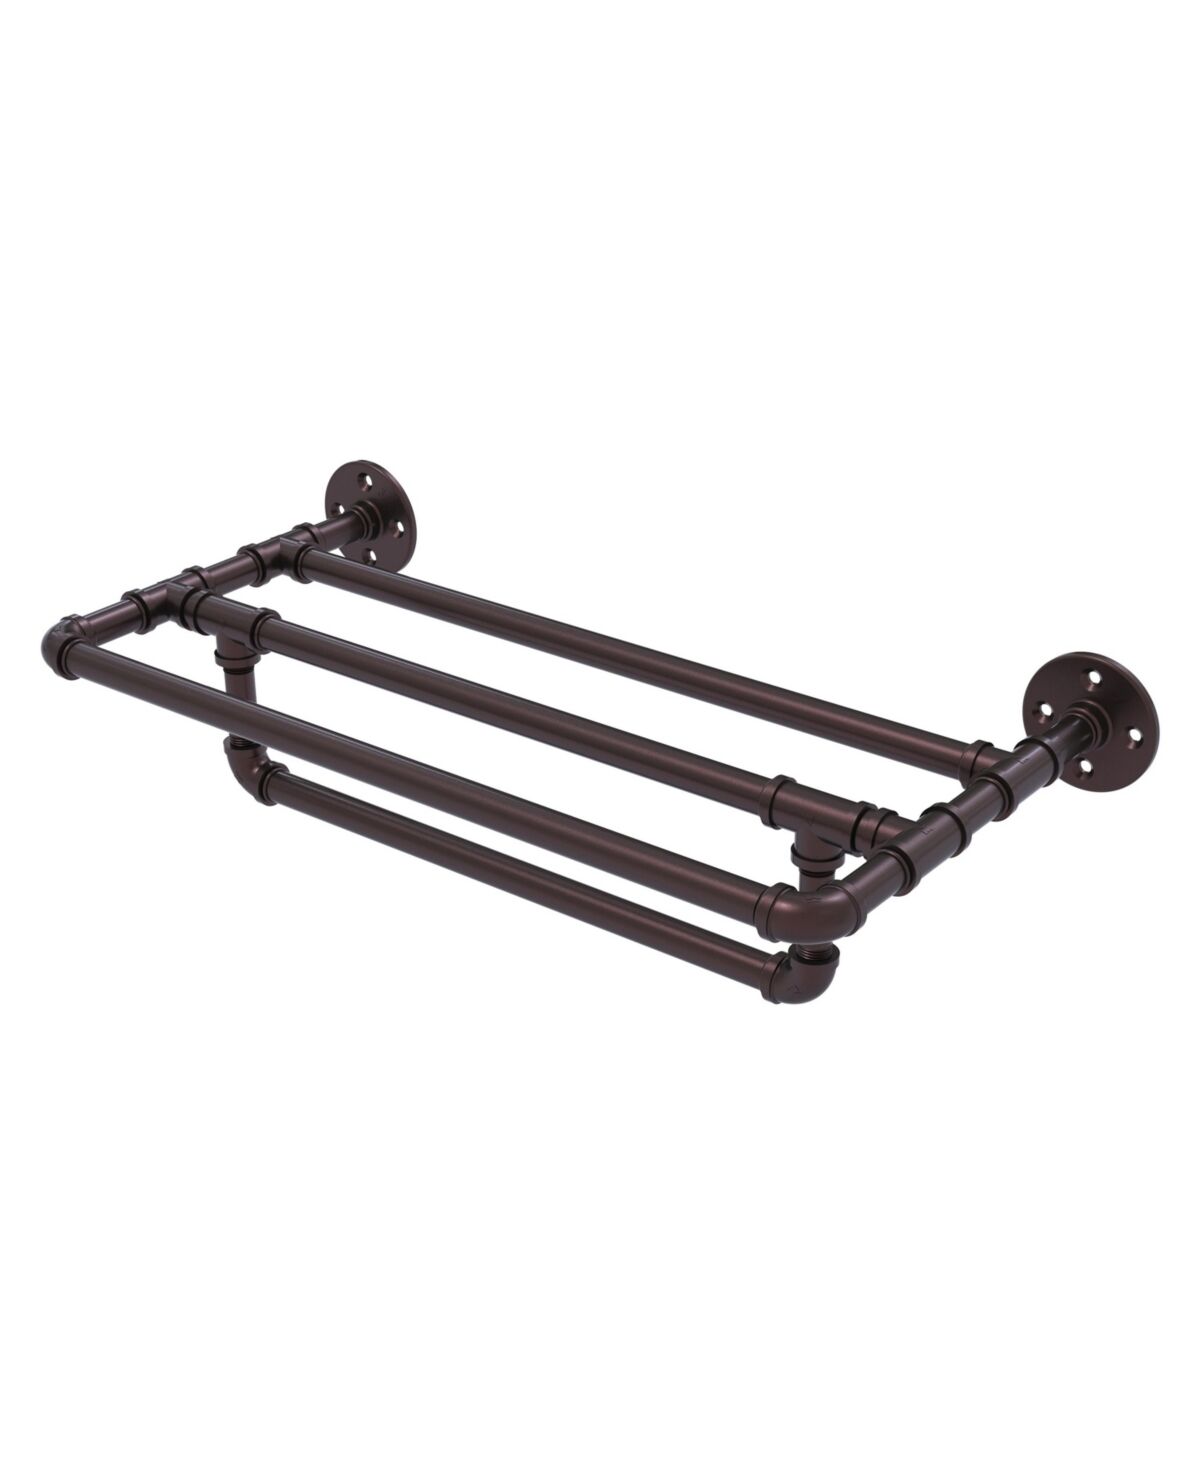 Allied Pipeline Collection 24 Inch Wall Mounted Towel Shelf with Towel Bar - Antique bronze